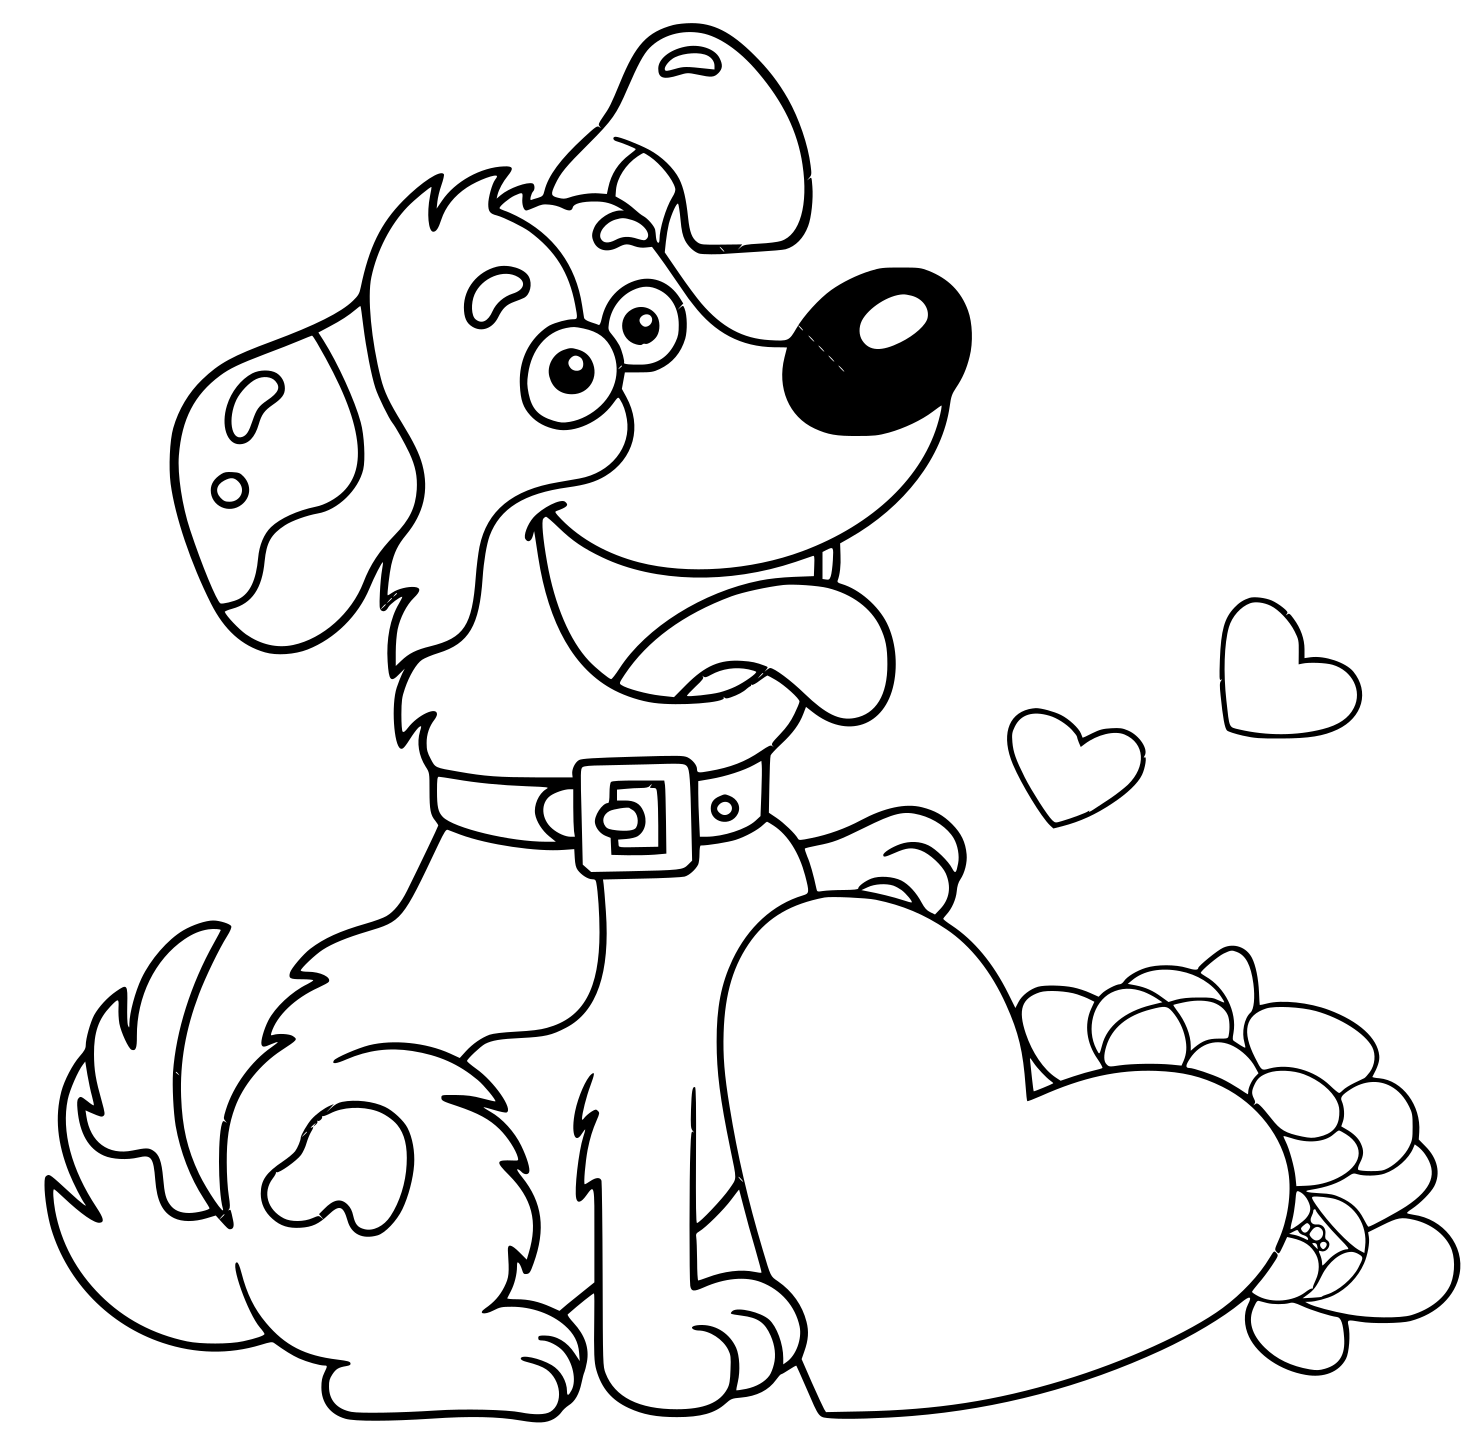 Cartoon Dog With Flowers And Heart Greeting Card Birthday Valenti Coloring Page